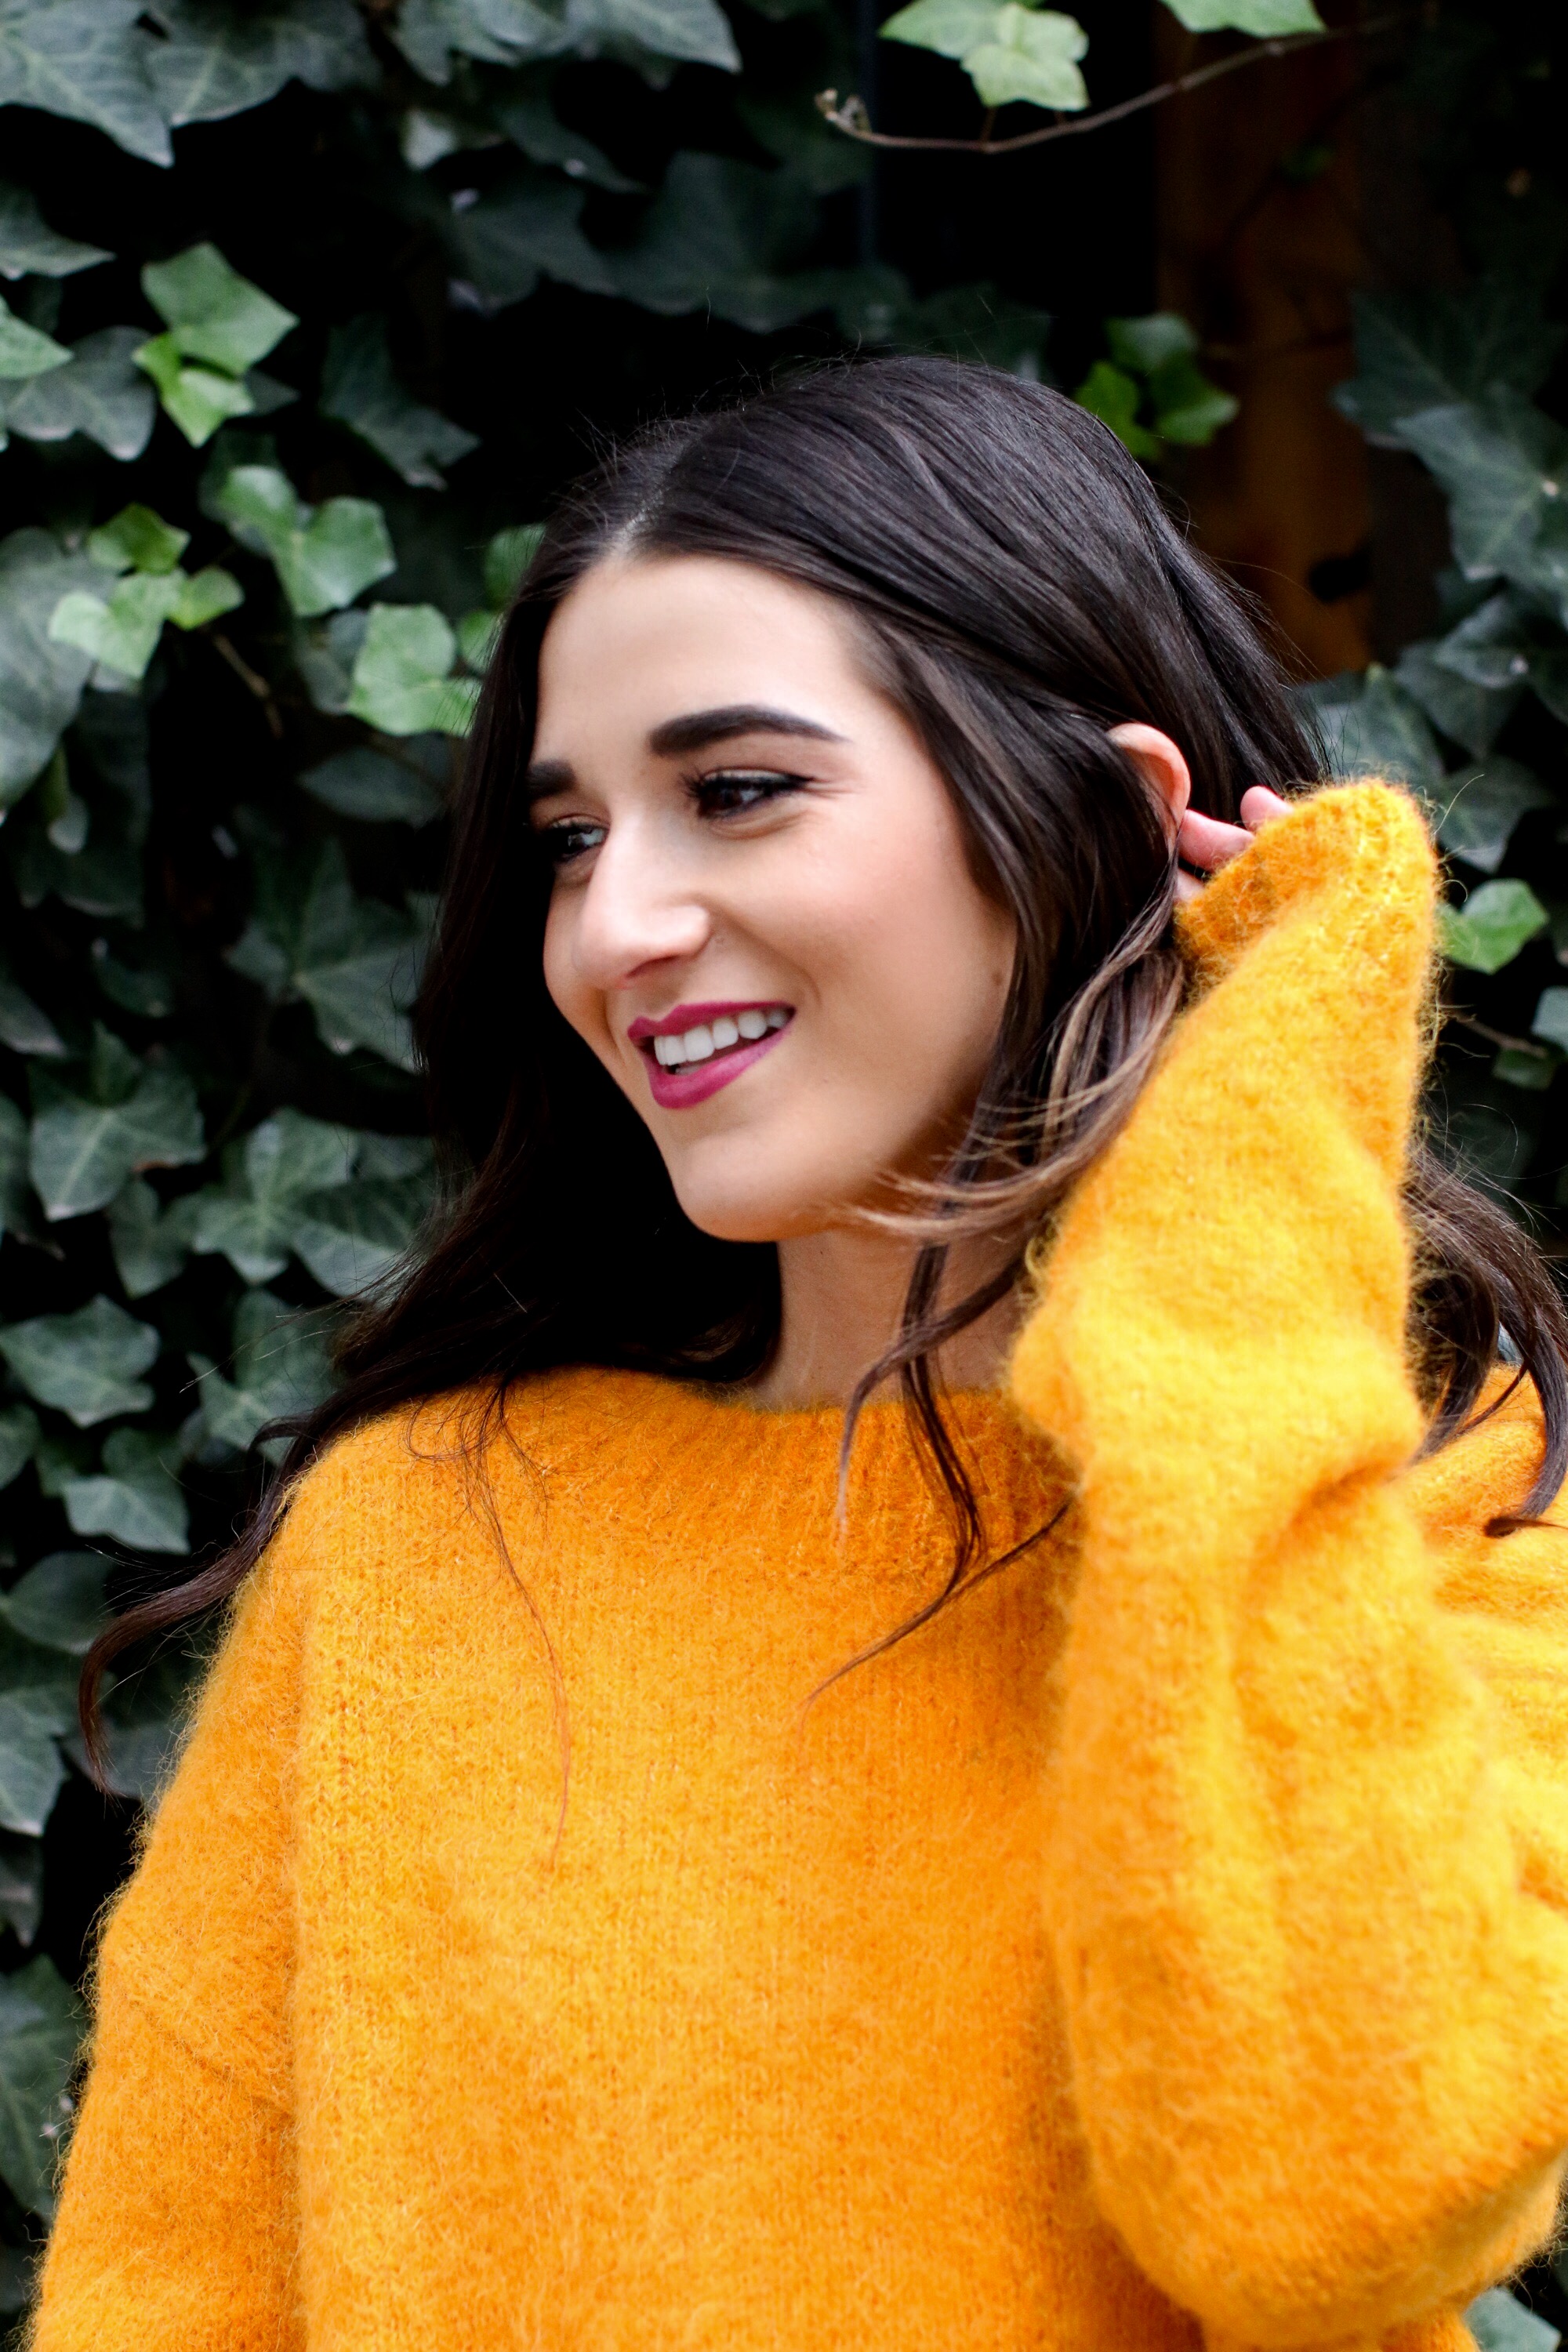 Yellow Sweater Pleather Skirt Why You Should Think Before You Unfollow Esther Santer Fashion Blog NYC Street Style Blogger Outfit OOTD Trendy Cozy Winter Look Girl Women Oversized Top New York City Instagram Tips DSW  Studded Boots H&M Topshop Details.jpg